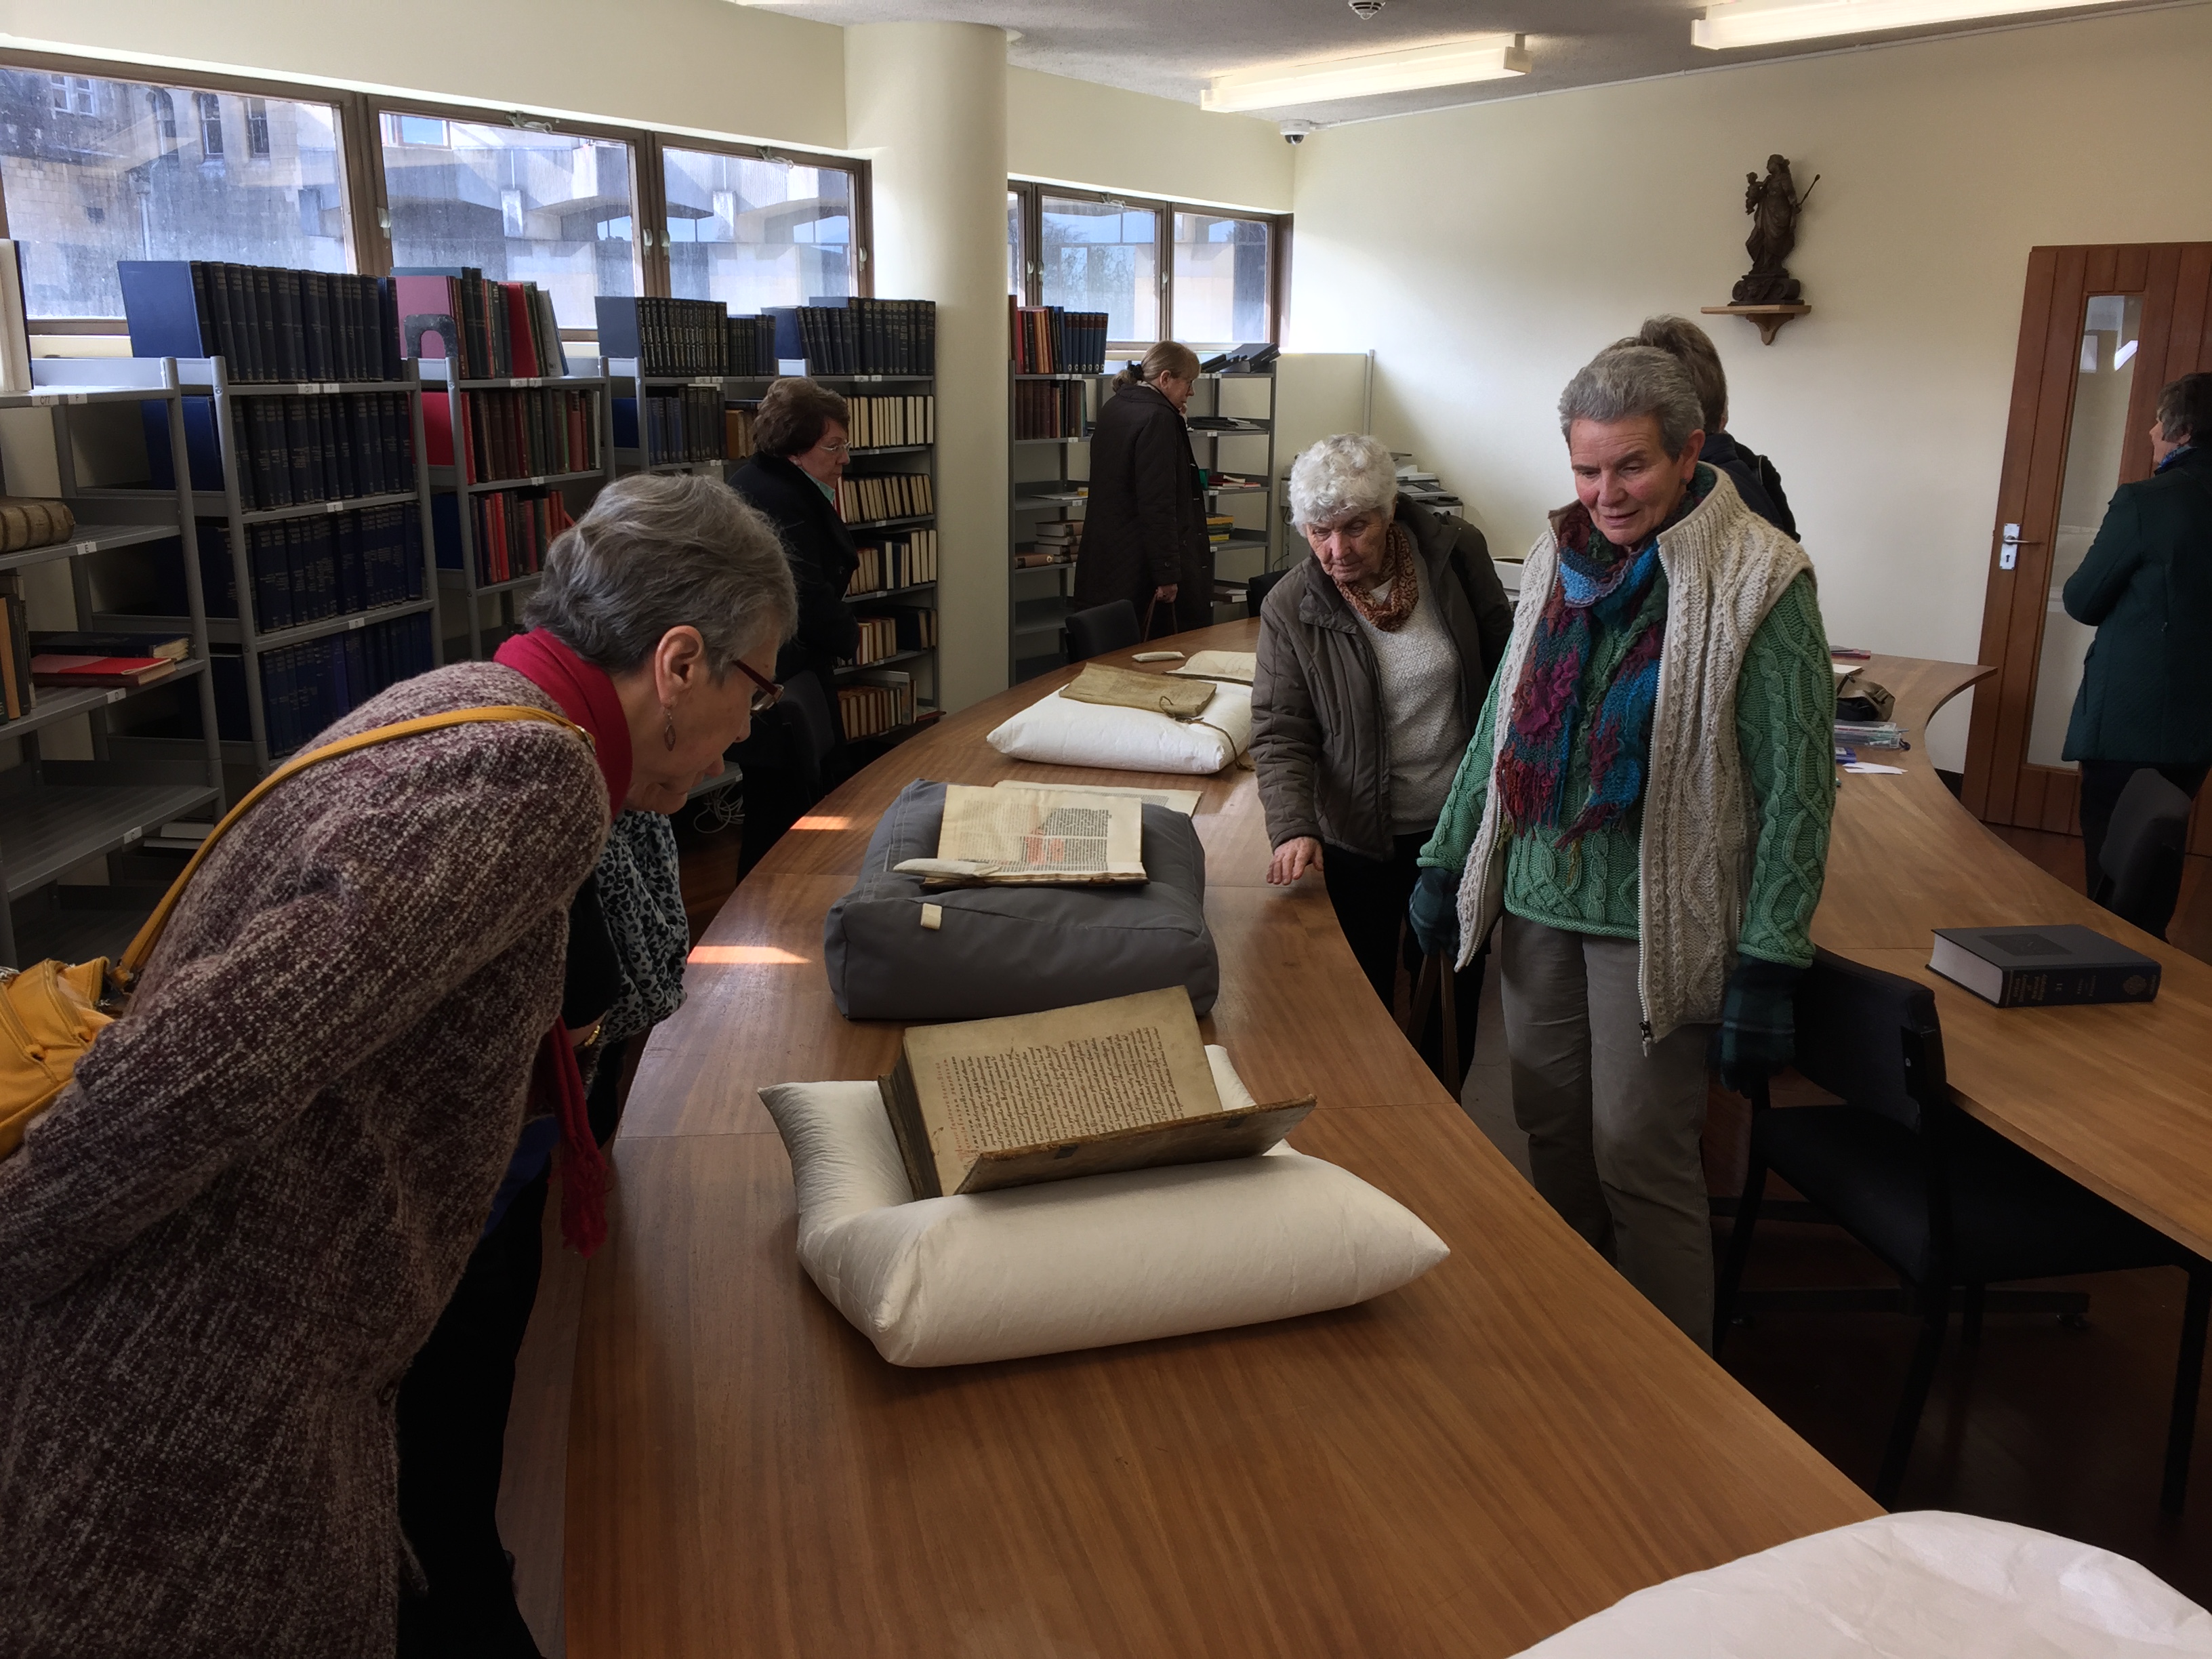 Abbey volunteers looking at old books